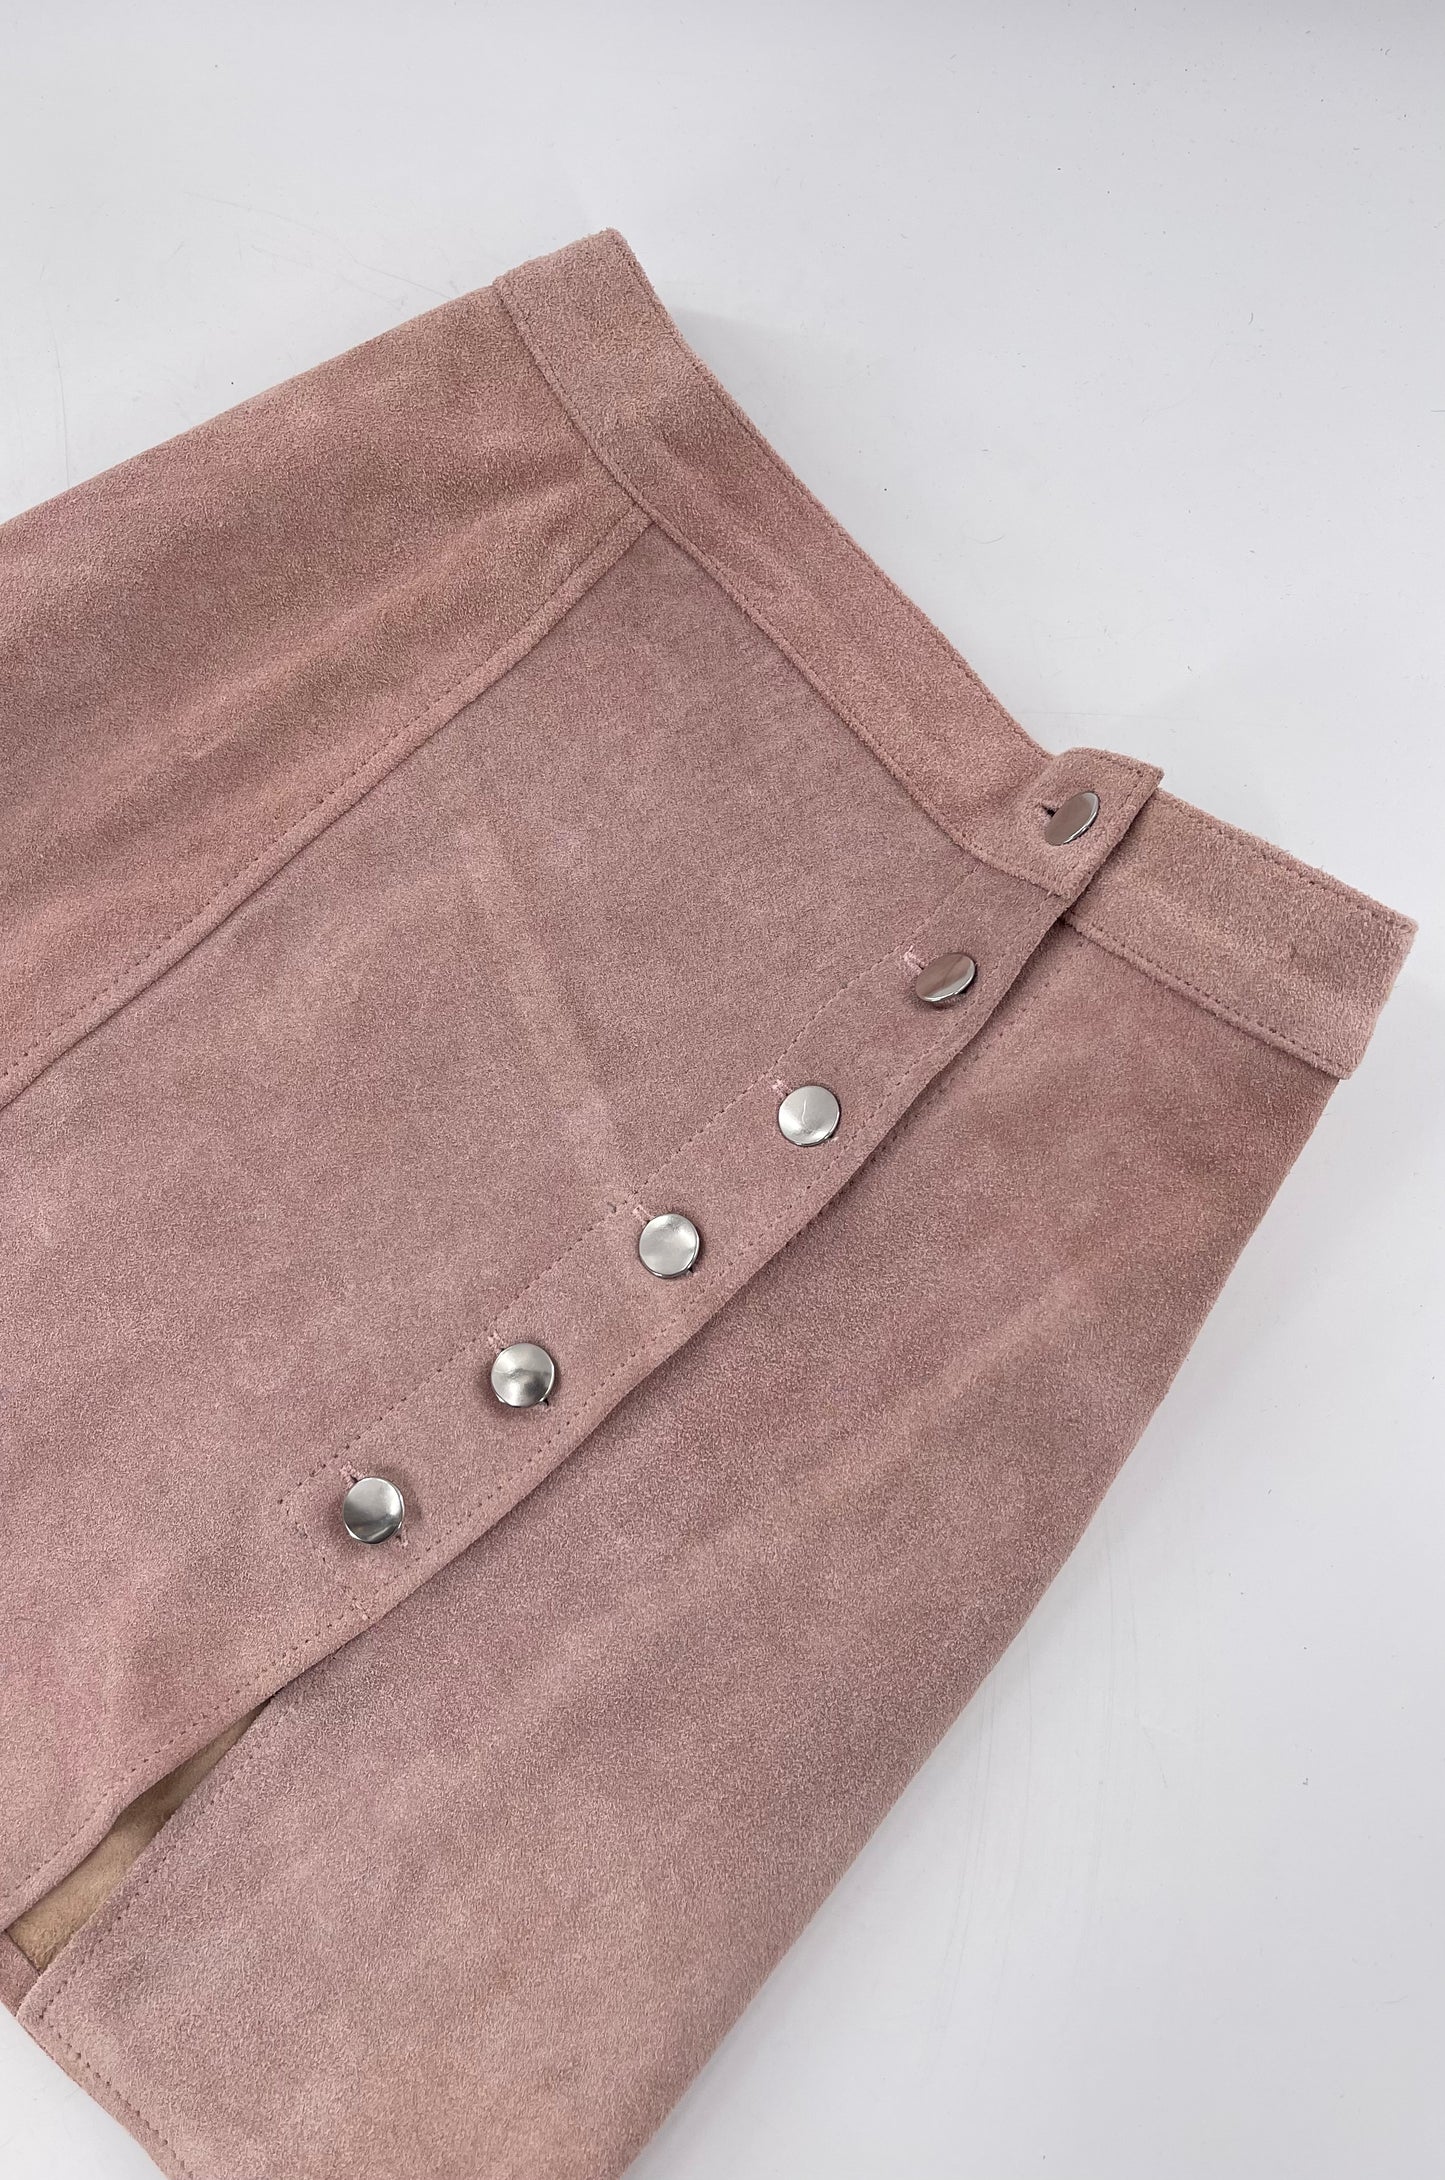 Free People Understated Leather Dusty Pink Suede Button Side Mini Skirt (Small)